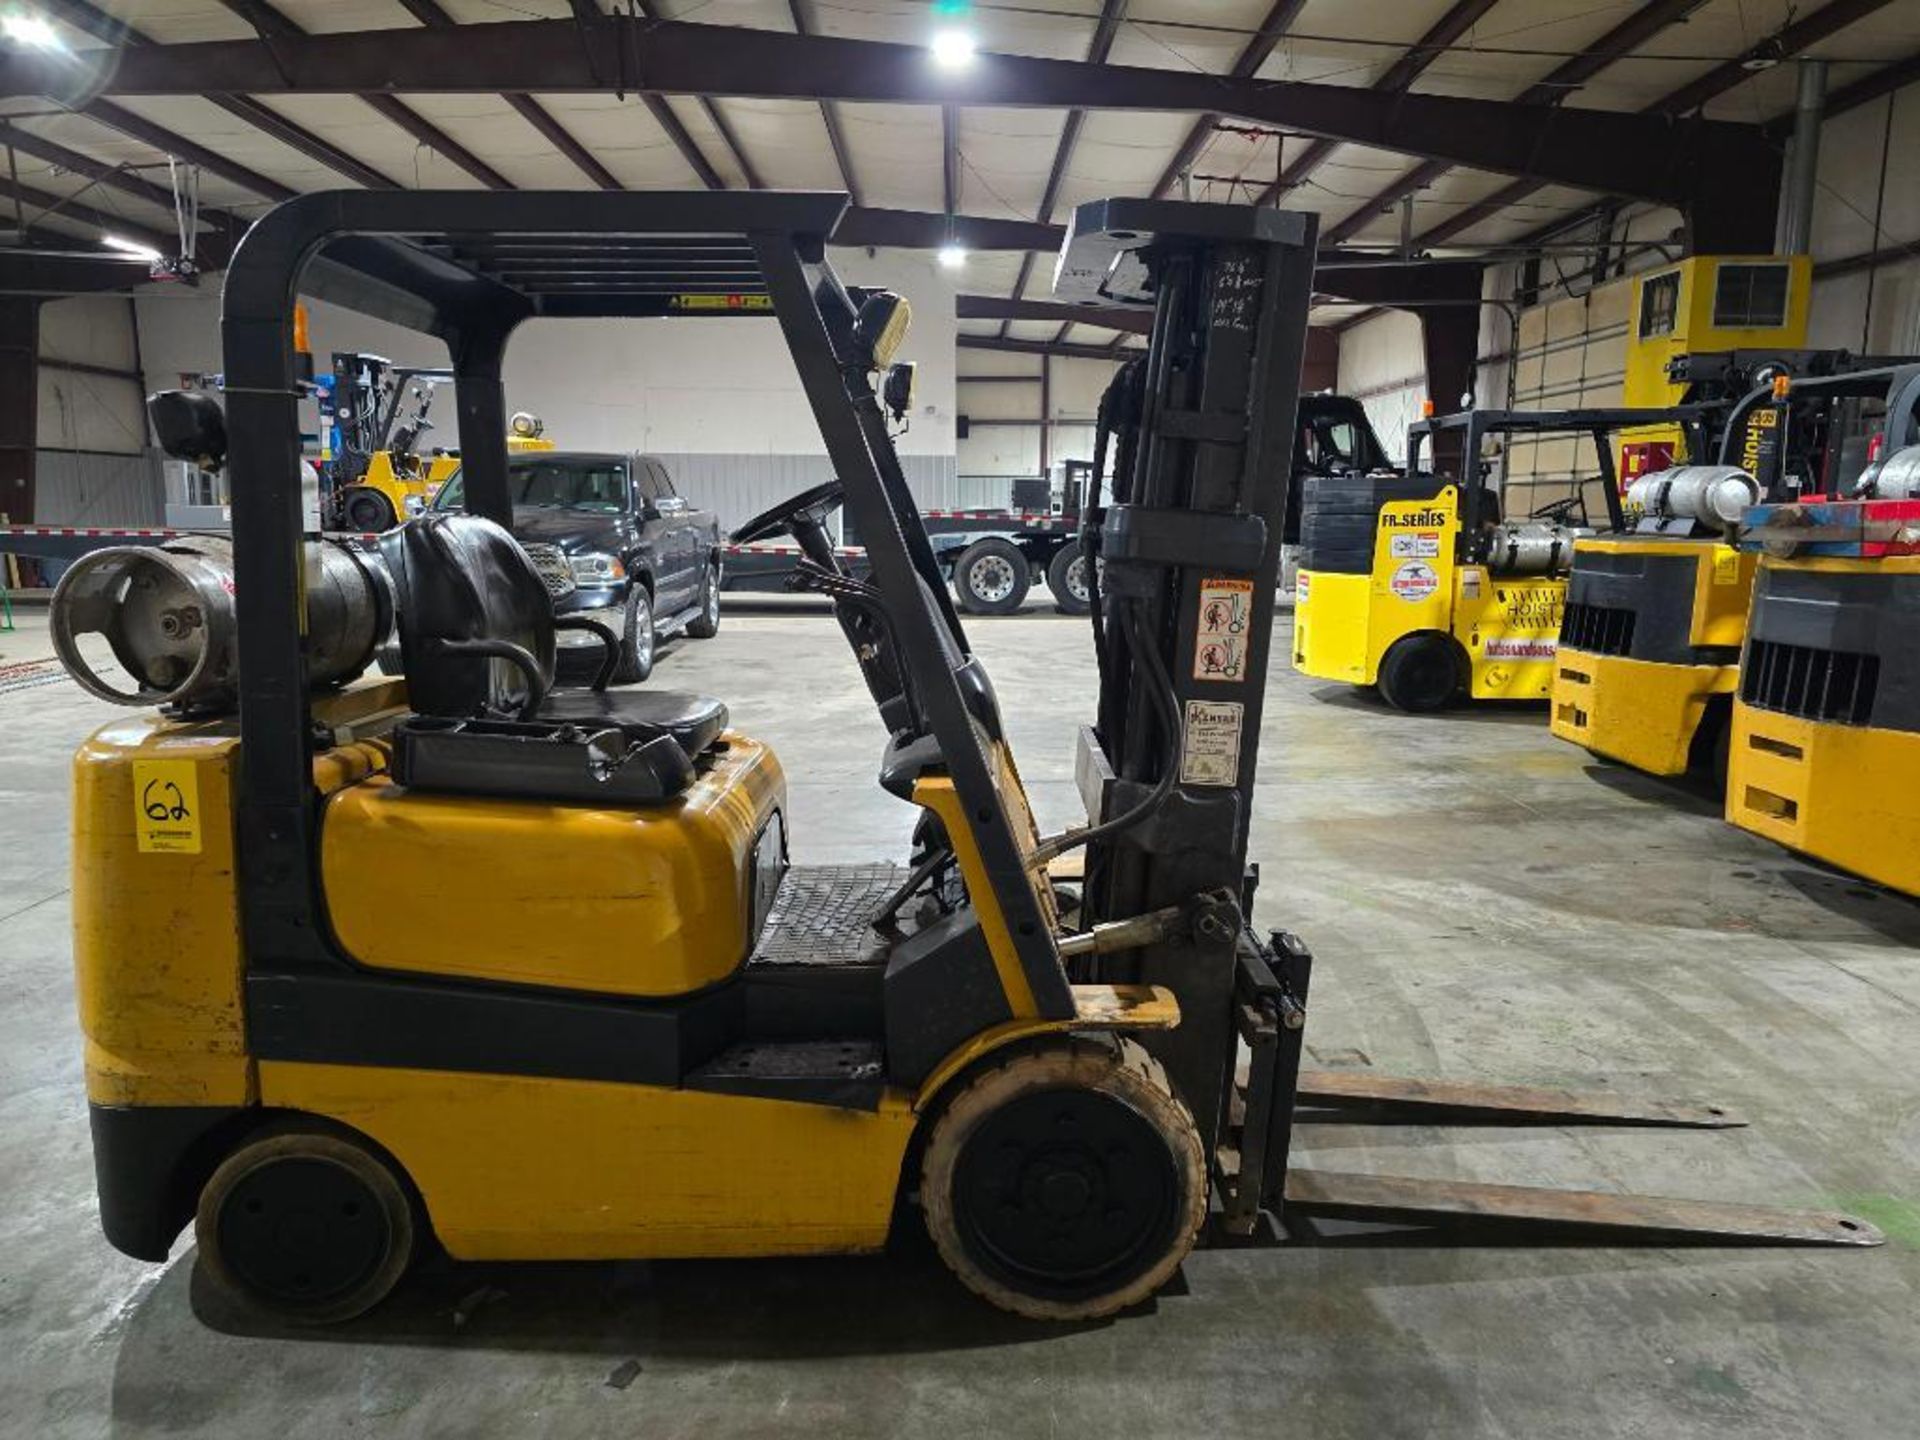 Caterpillar 5,000-LB. Capacity Forklift, Model CG25, LPG, 3,000 Hours, 188" Lift Height, S/N AT82001 - Image 6 of 12